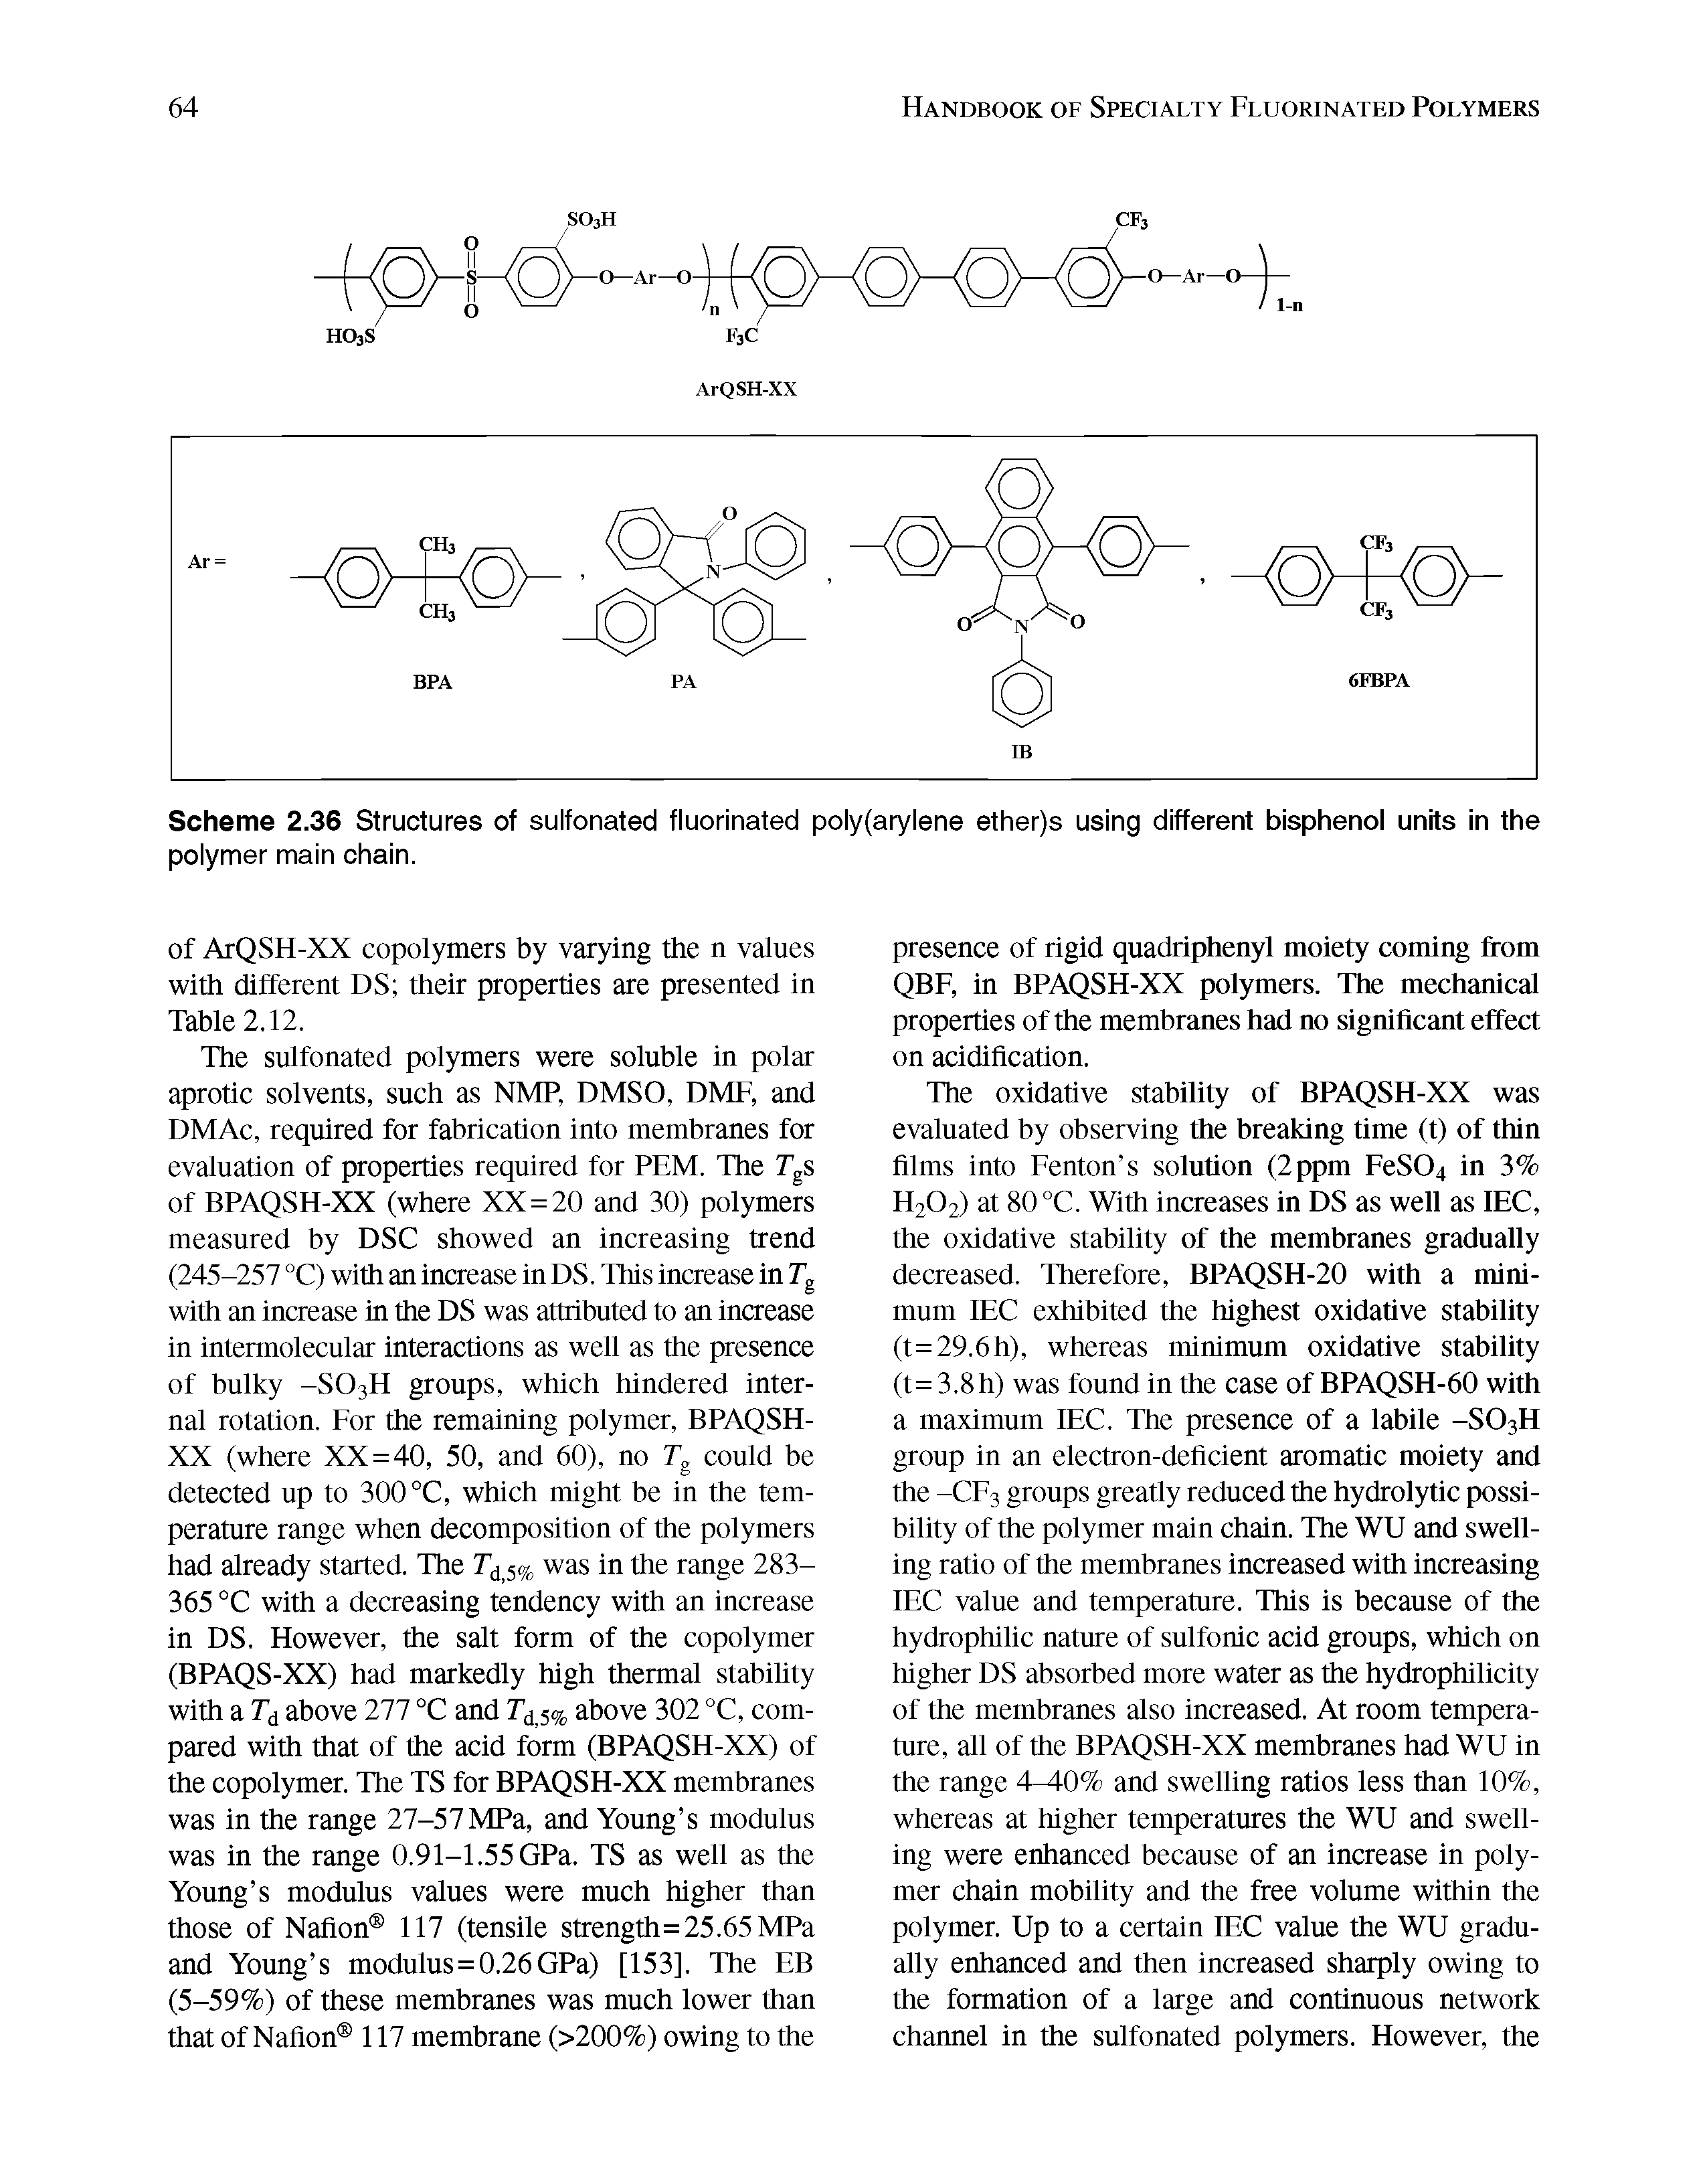 Scheme 2.36 Structures of sulfonated fluorinated poly(arylene ether)s using different bisphenol units in the polymer main chain.